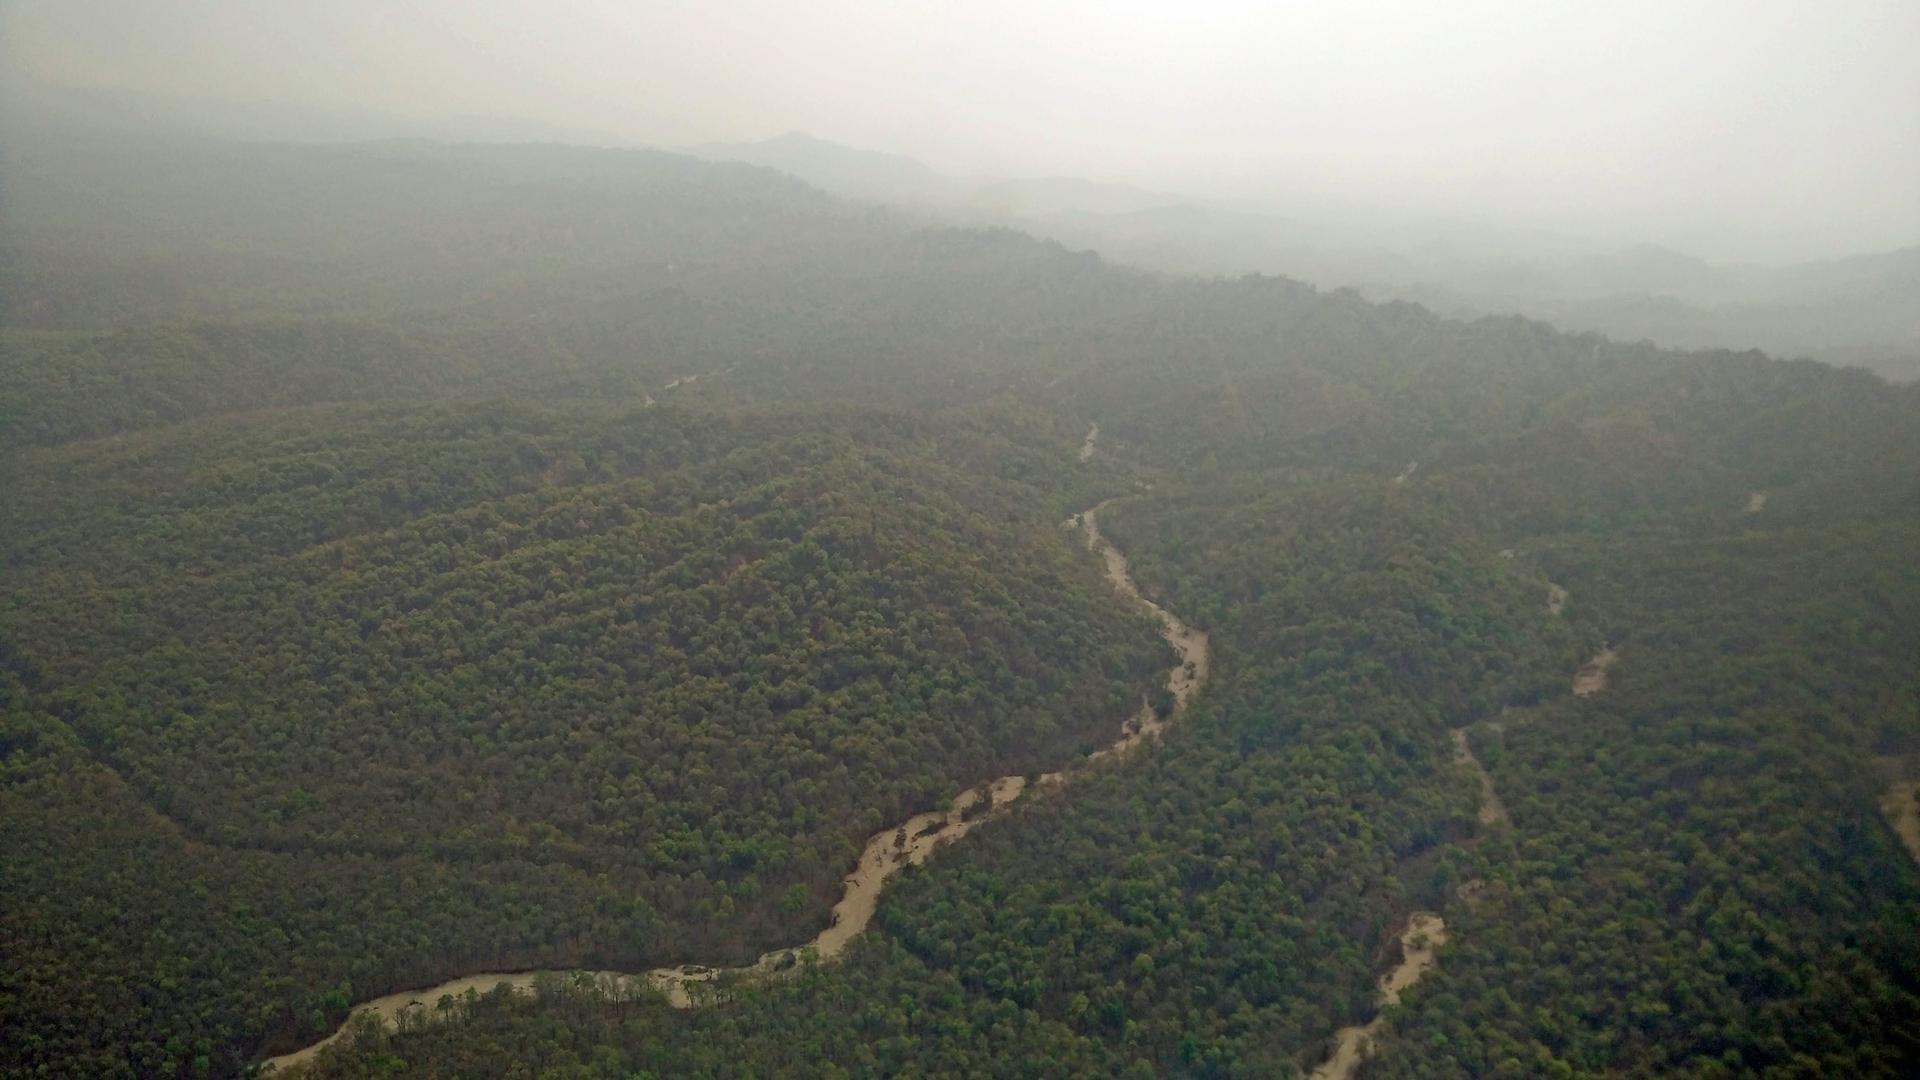 Smoke from forest fires hangs over dry mountain rivers near Dehradun, in the foothills of the Himalayas, in northern India.